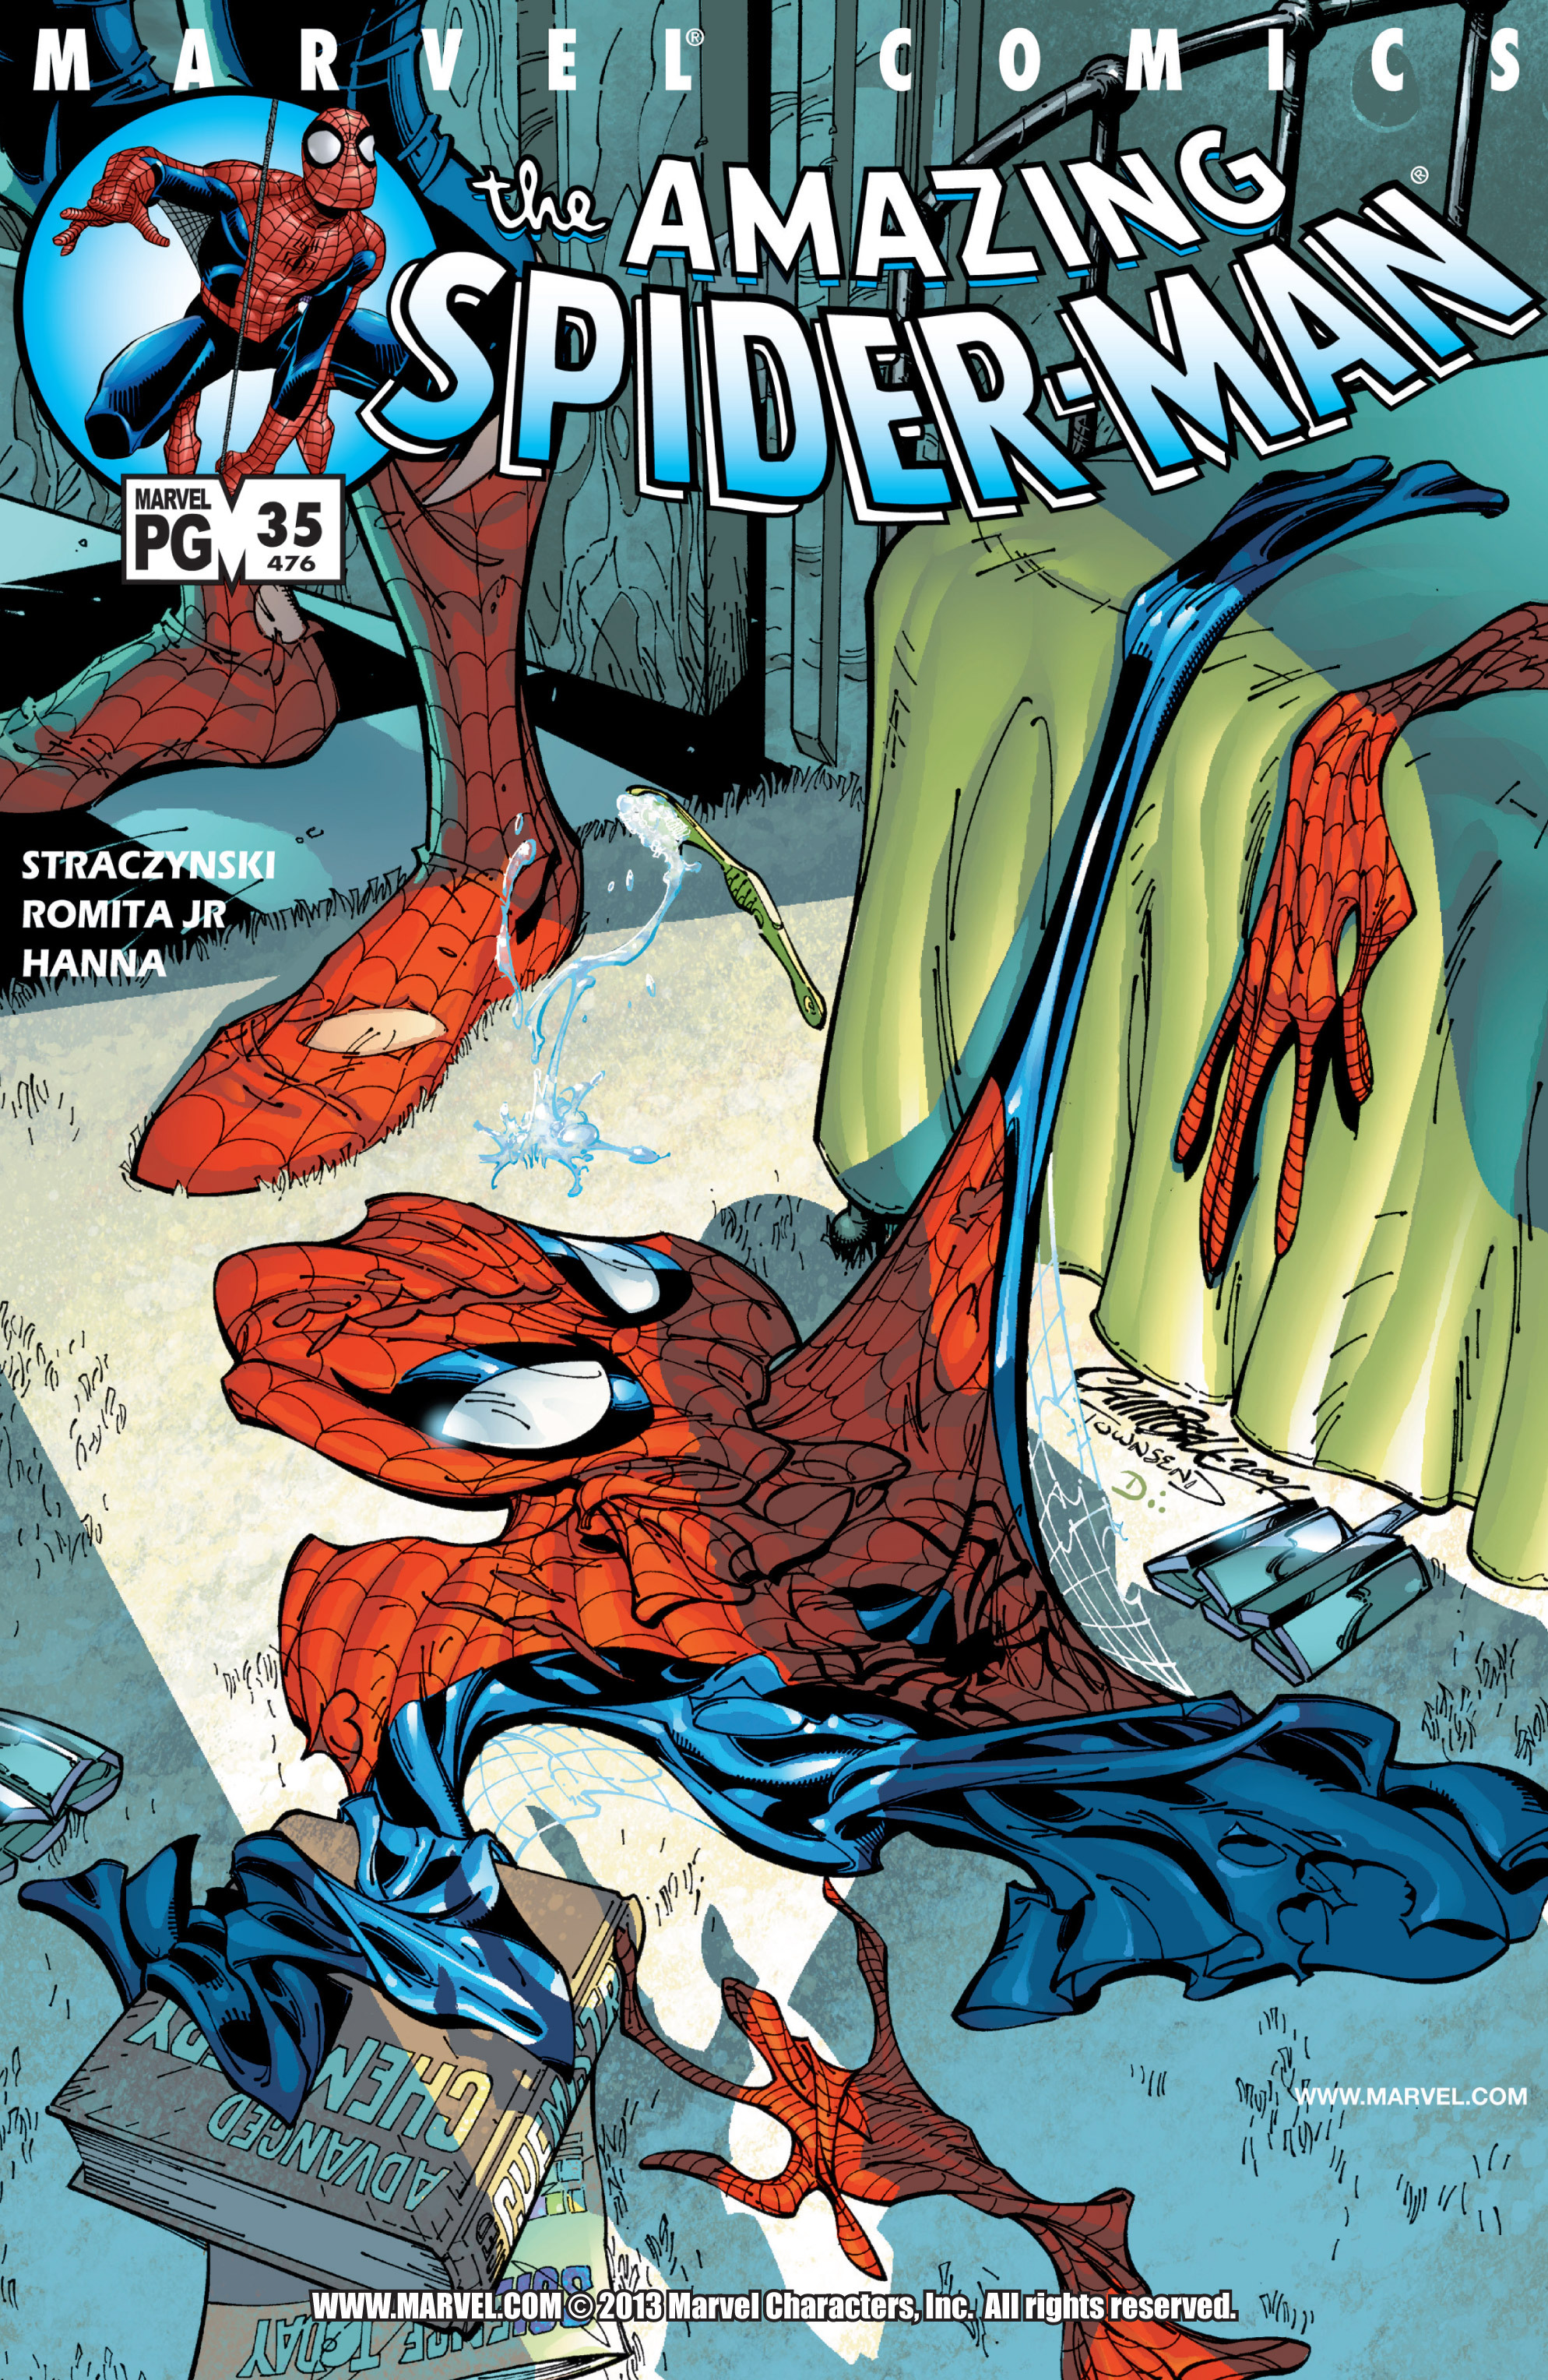 1988px x 3056px - The Amazing Spider Man 1999 Issue 35 | Read The Amazing Spider Man 1999  Issue 35 comic online in high quality. Read Full Comic online for free -  Read comics online in high quality .